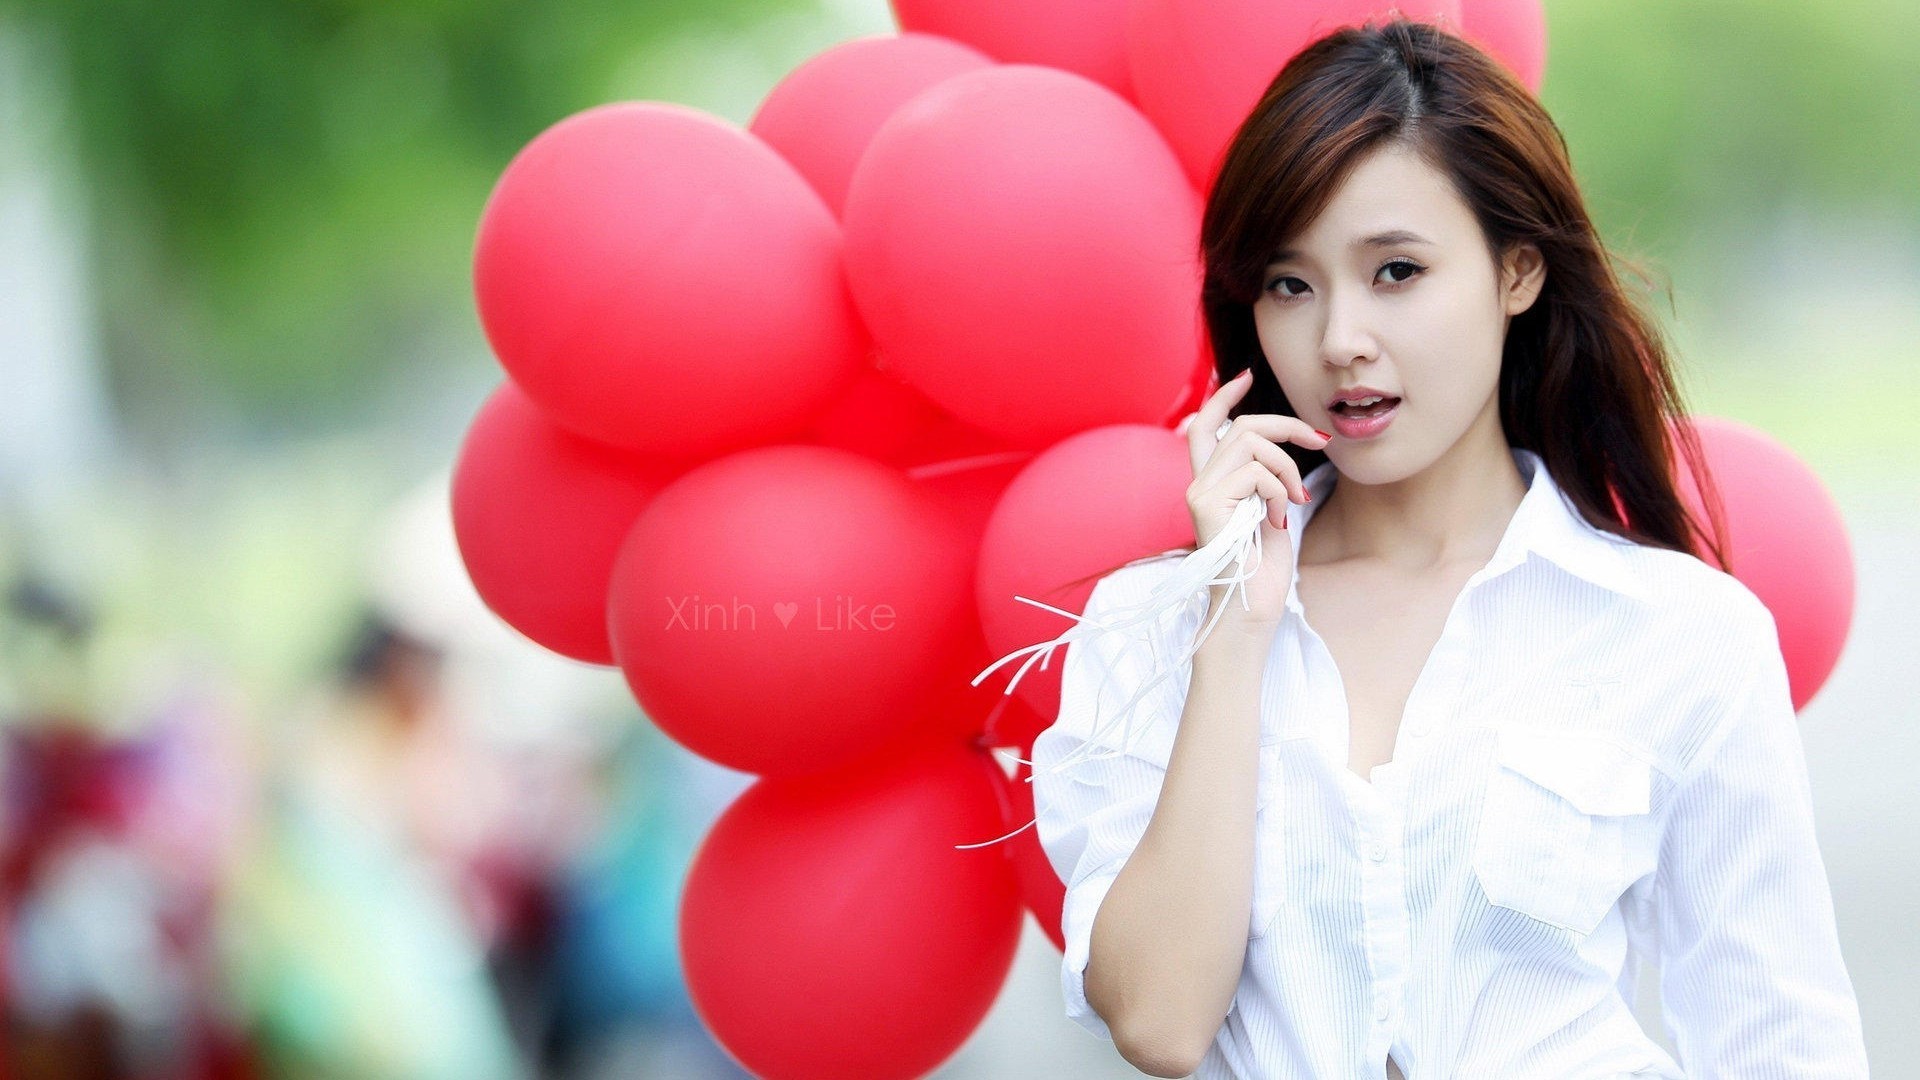 Beautiful girl with balloons wallpaper | AllWallpaper.in #16504 | PC ...